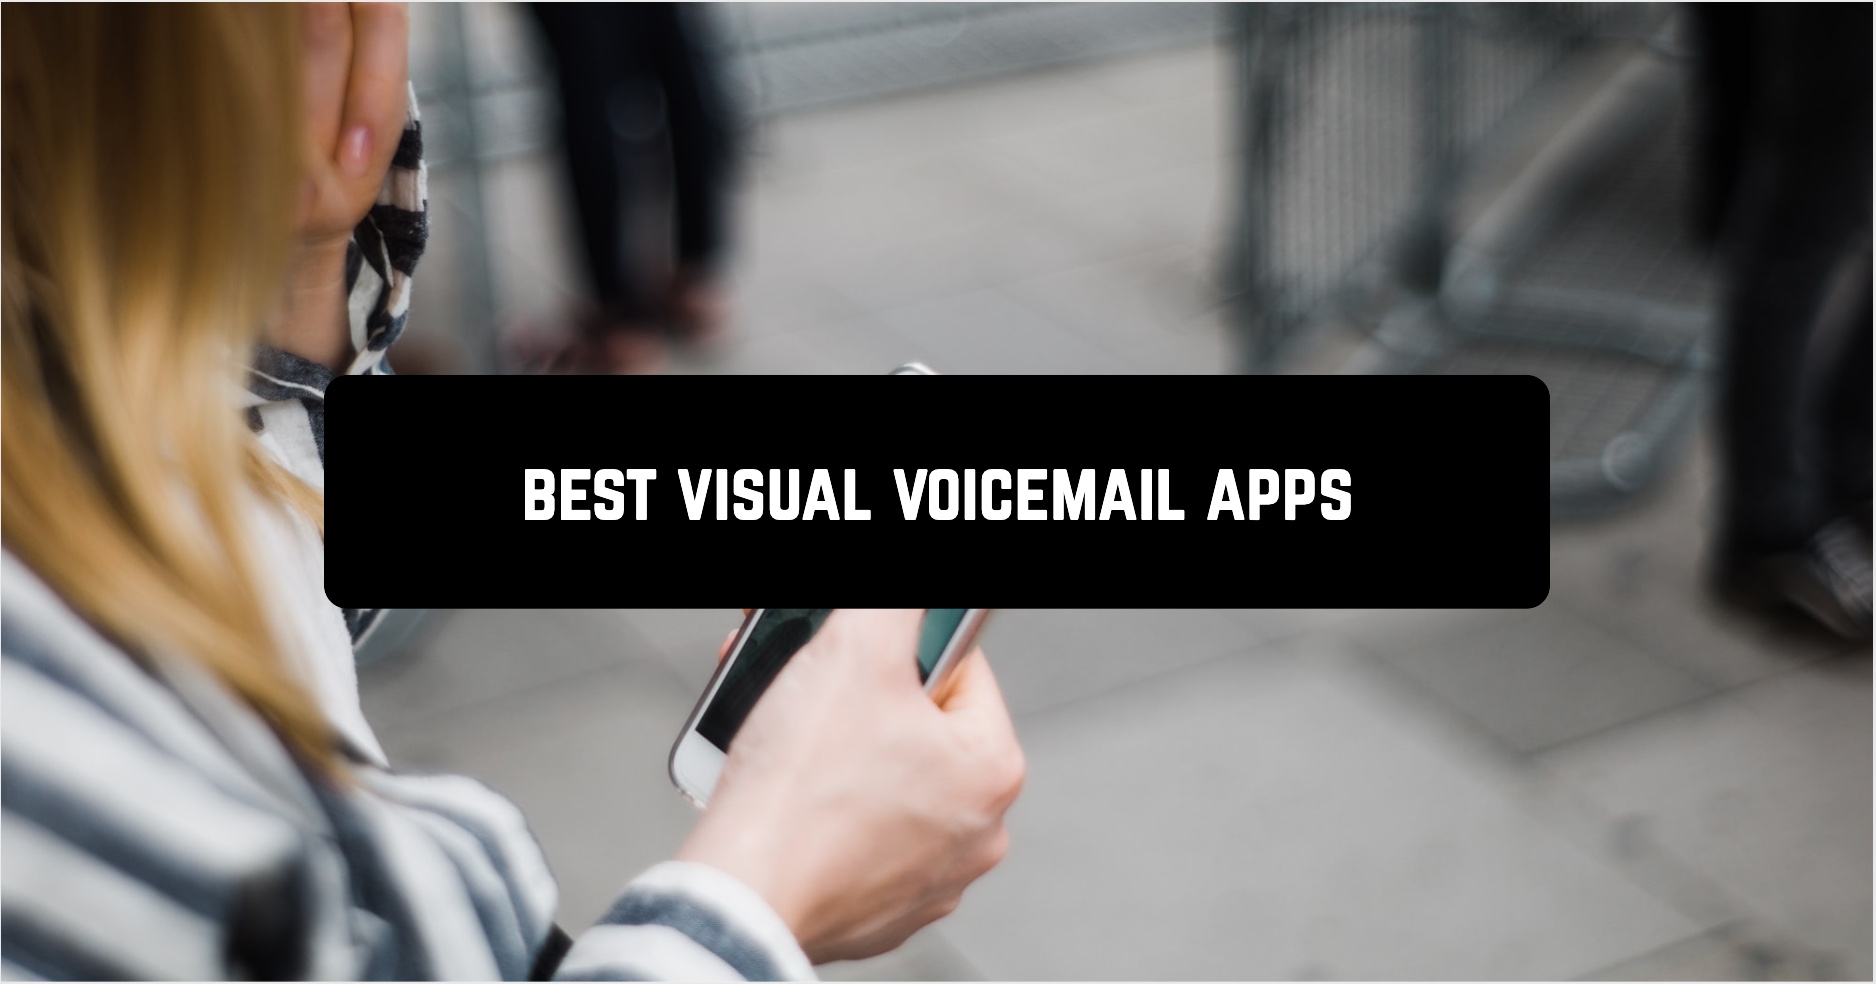 Best visual voicemail apps